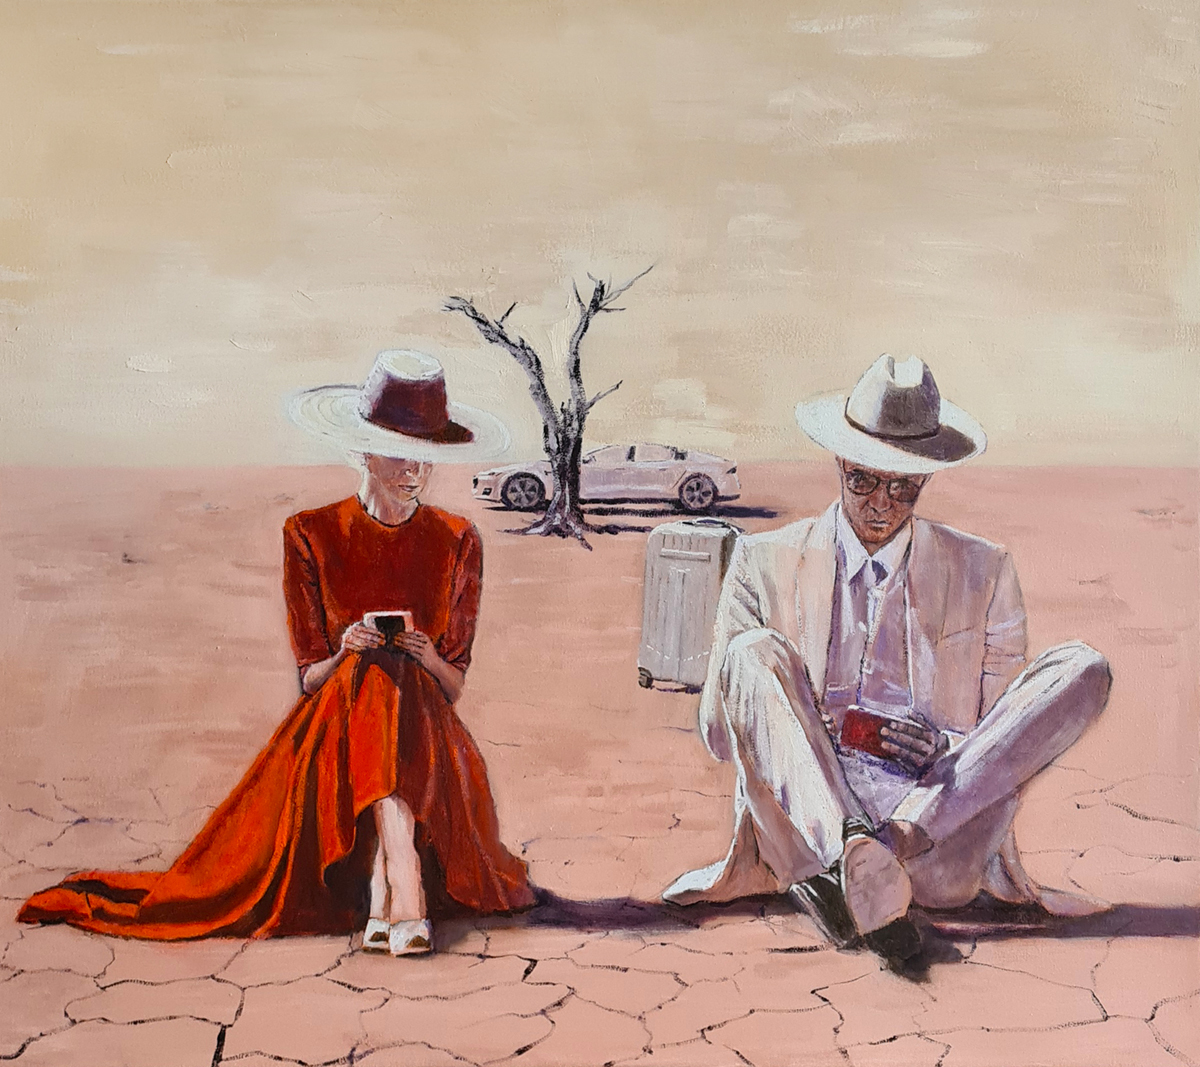 A woman and a man sit in desert while looking at their phones